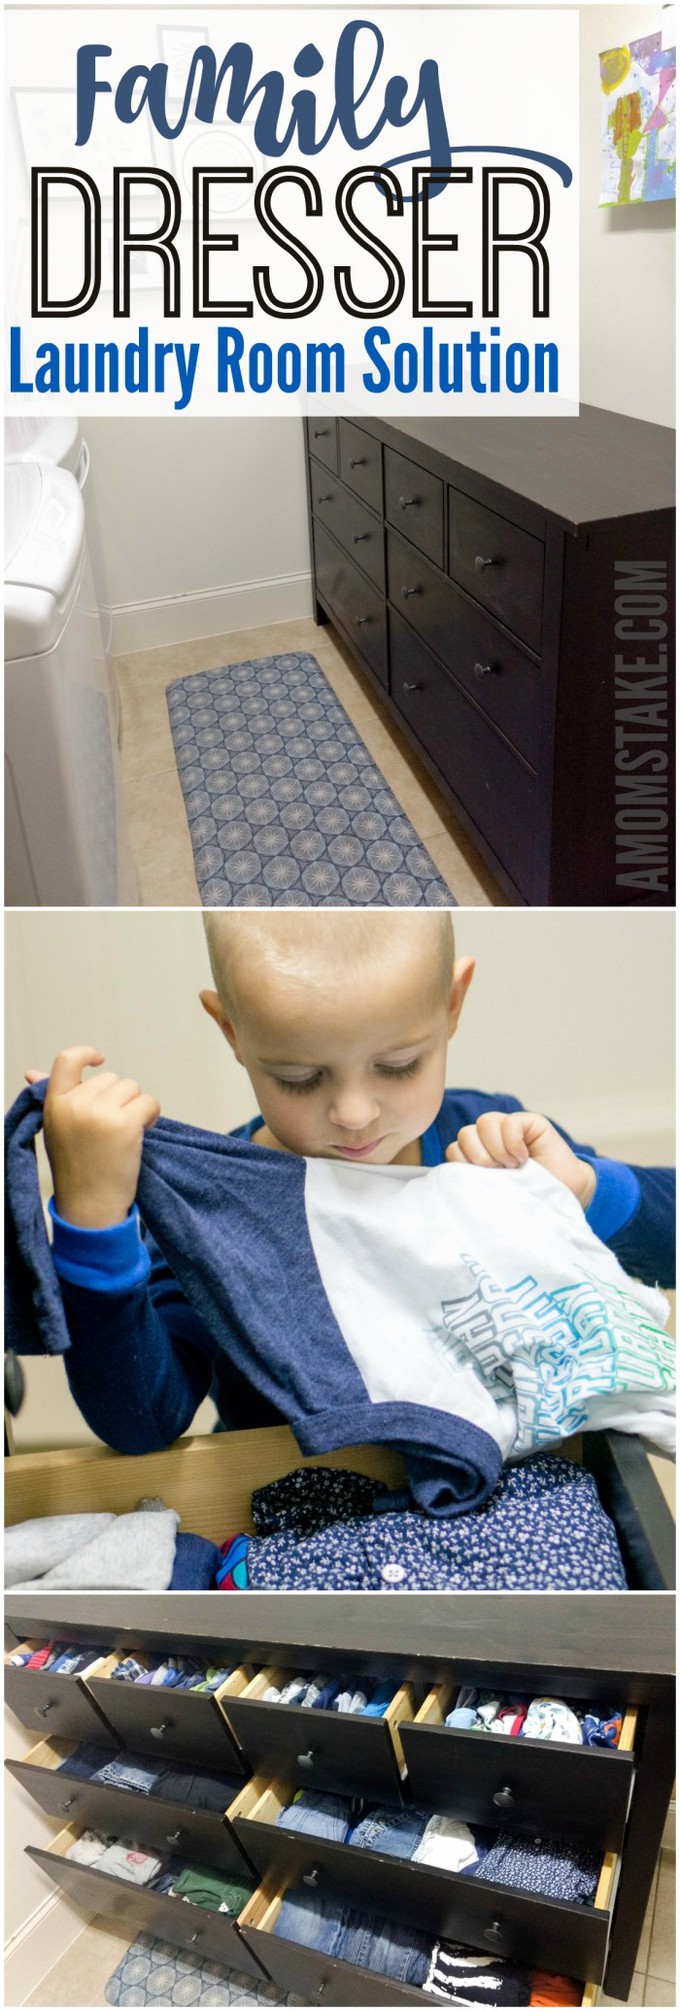 Family Dresser: The Laundry Solution You've Been Waiting For! Family Dresser A Laundry Room Solution